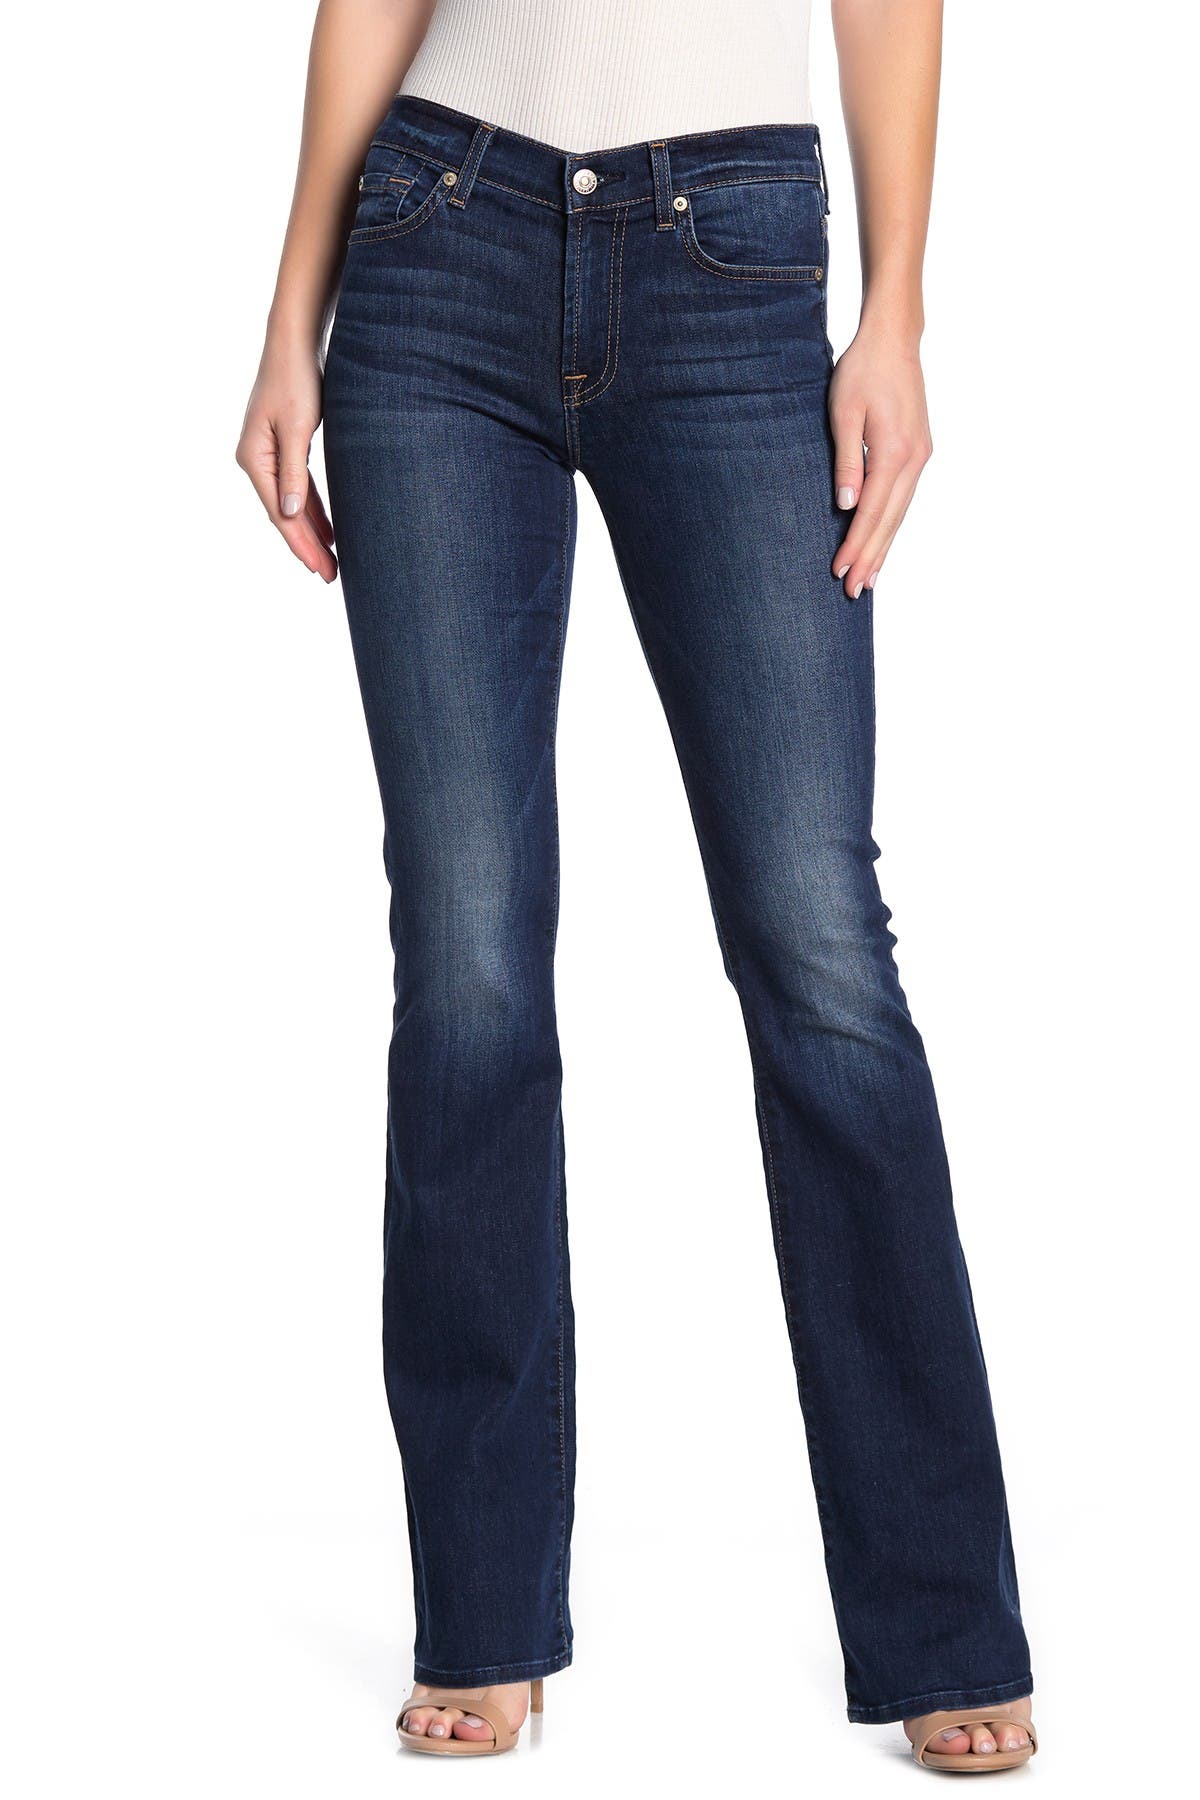 7 for all mankind petite tailorless bootcut jean